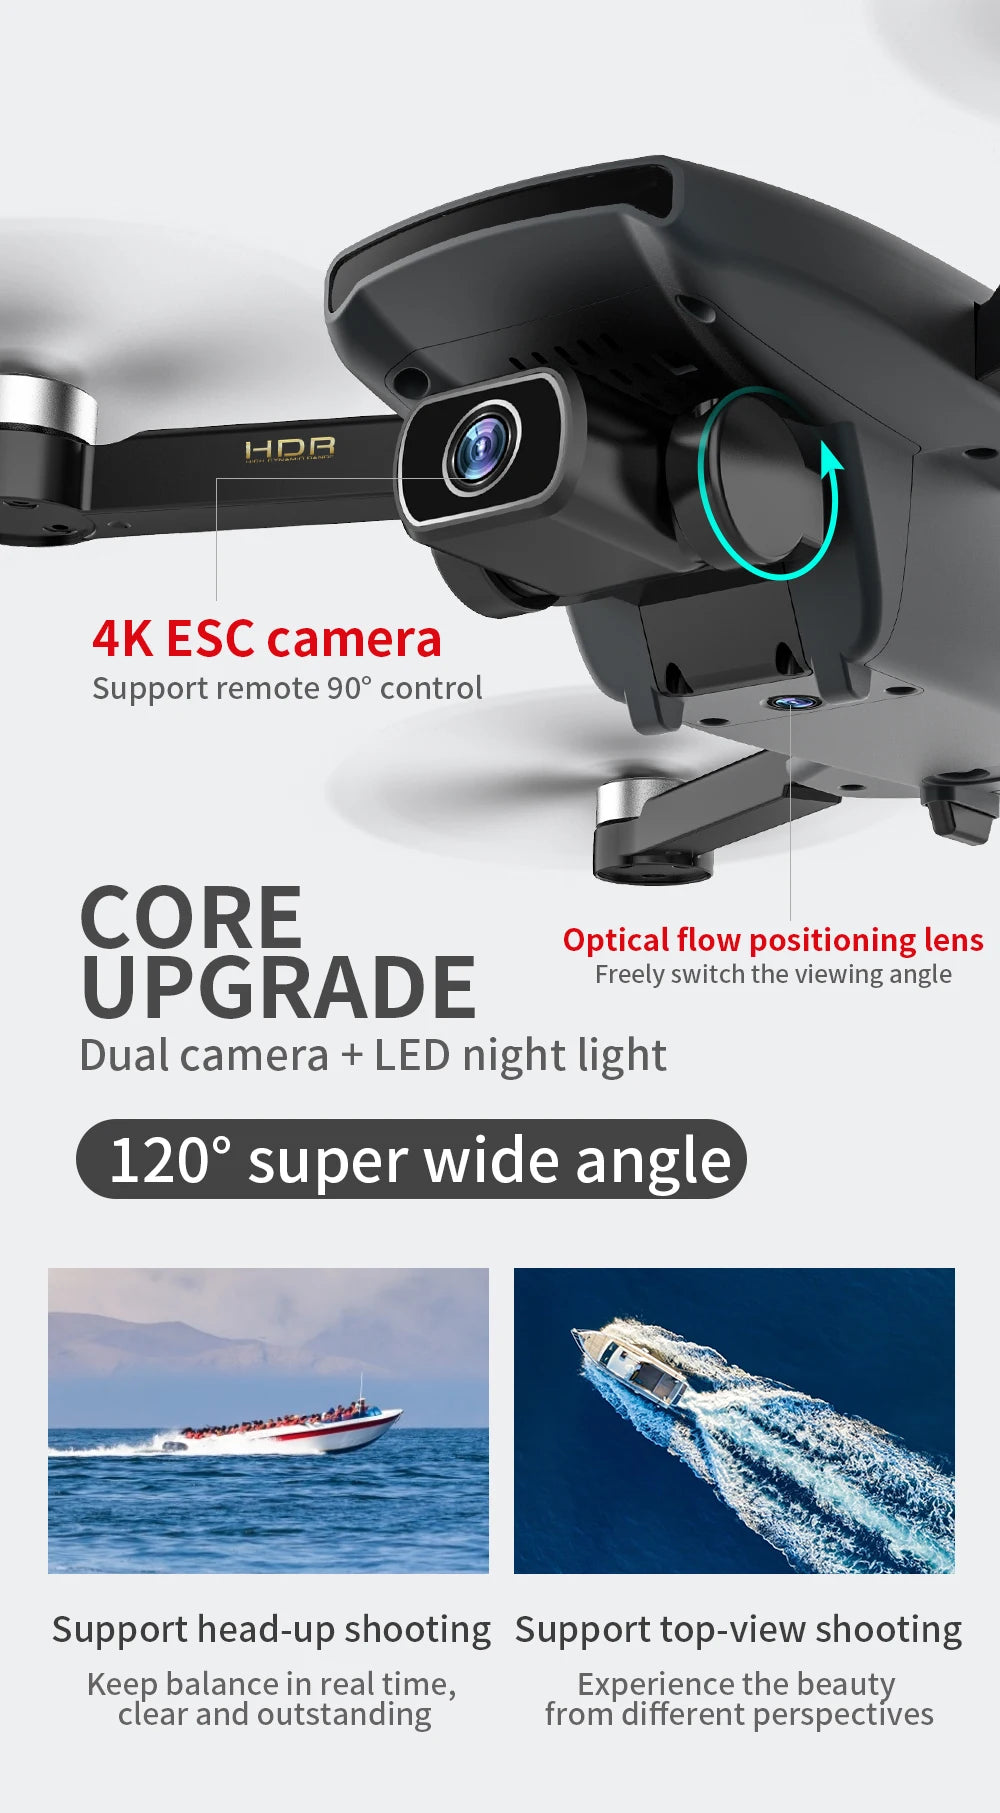 G108 Pro MAx Drone, 4K ESC camera Support remote 909 control CORE Optical flow positioning lens 